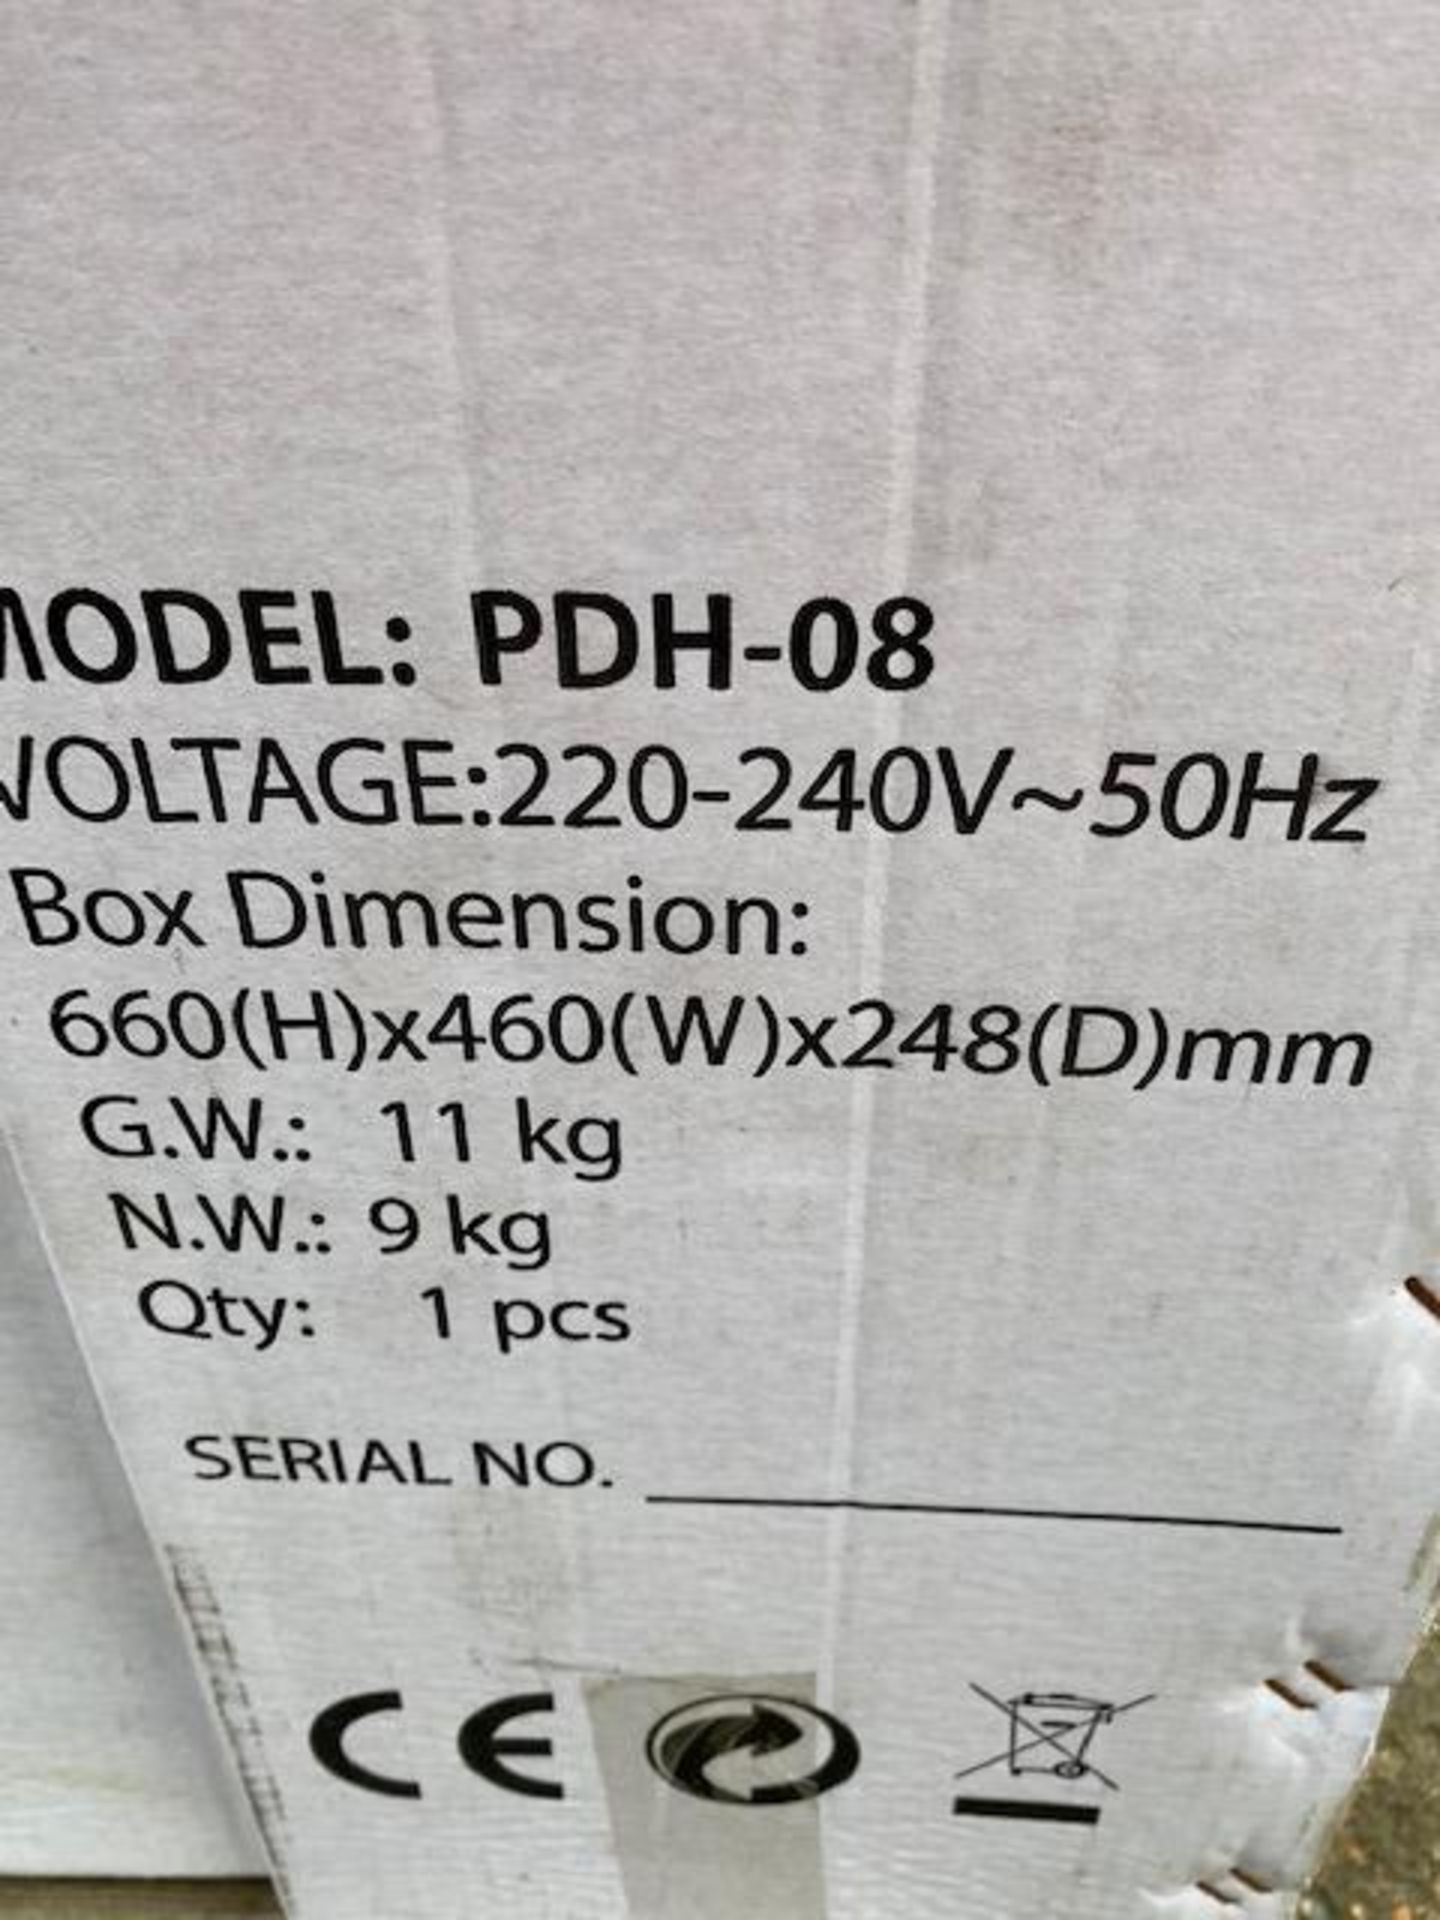 10x Servool PDH-08 Dehumidifiers, 220-240V, 50Hz - Image 9 of 12